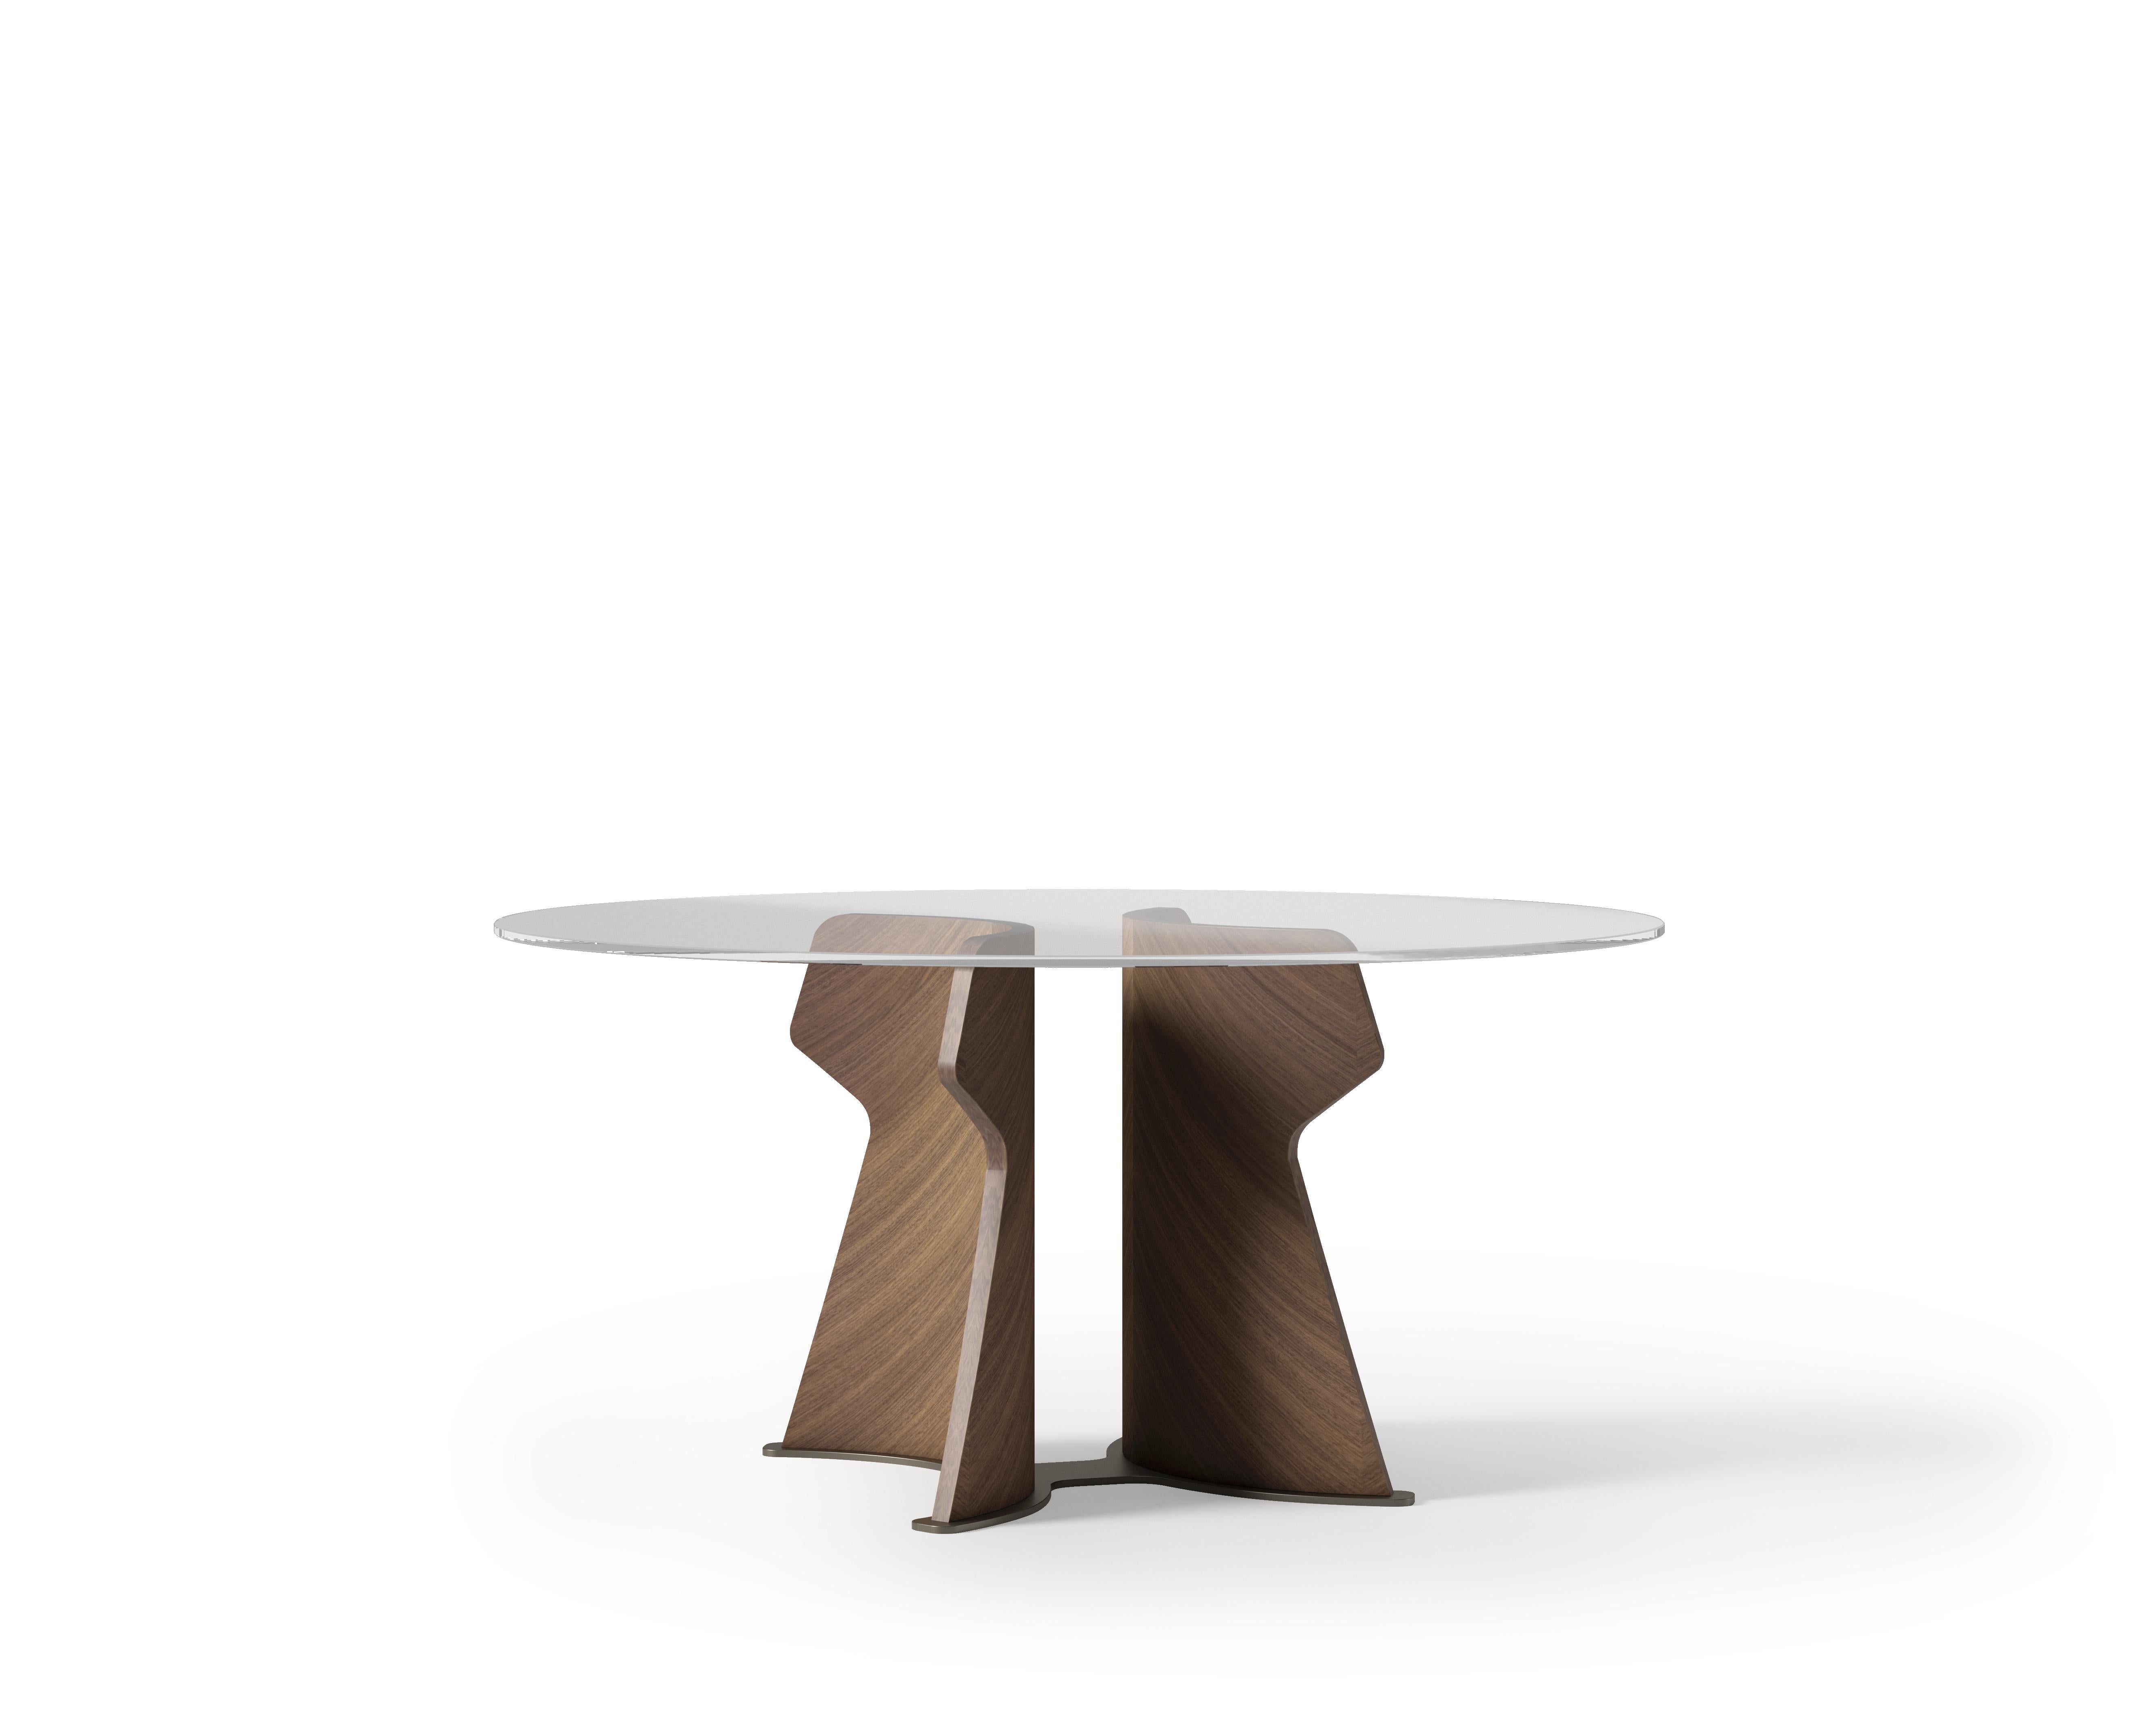 Table inspired by the decisive features of the architecture of Easter Island. It is characterized by a sculptural base covered in precious woods, available in light Tay, dark Tay and in Canaletto Walnut. The top is round or oval in extra-clear